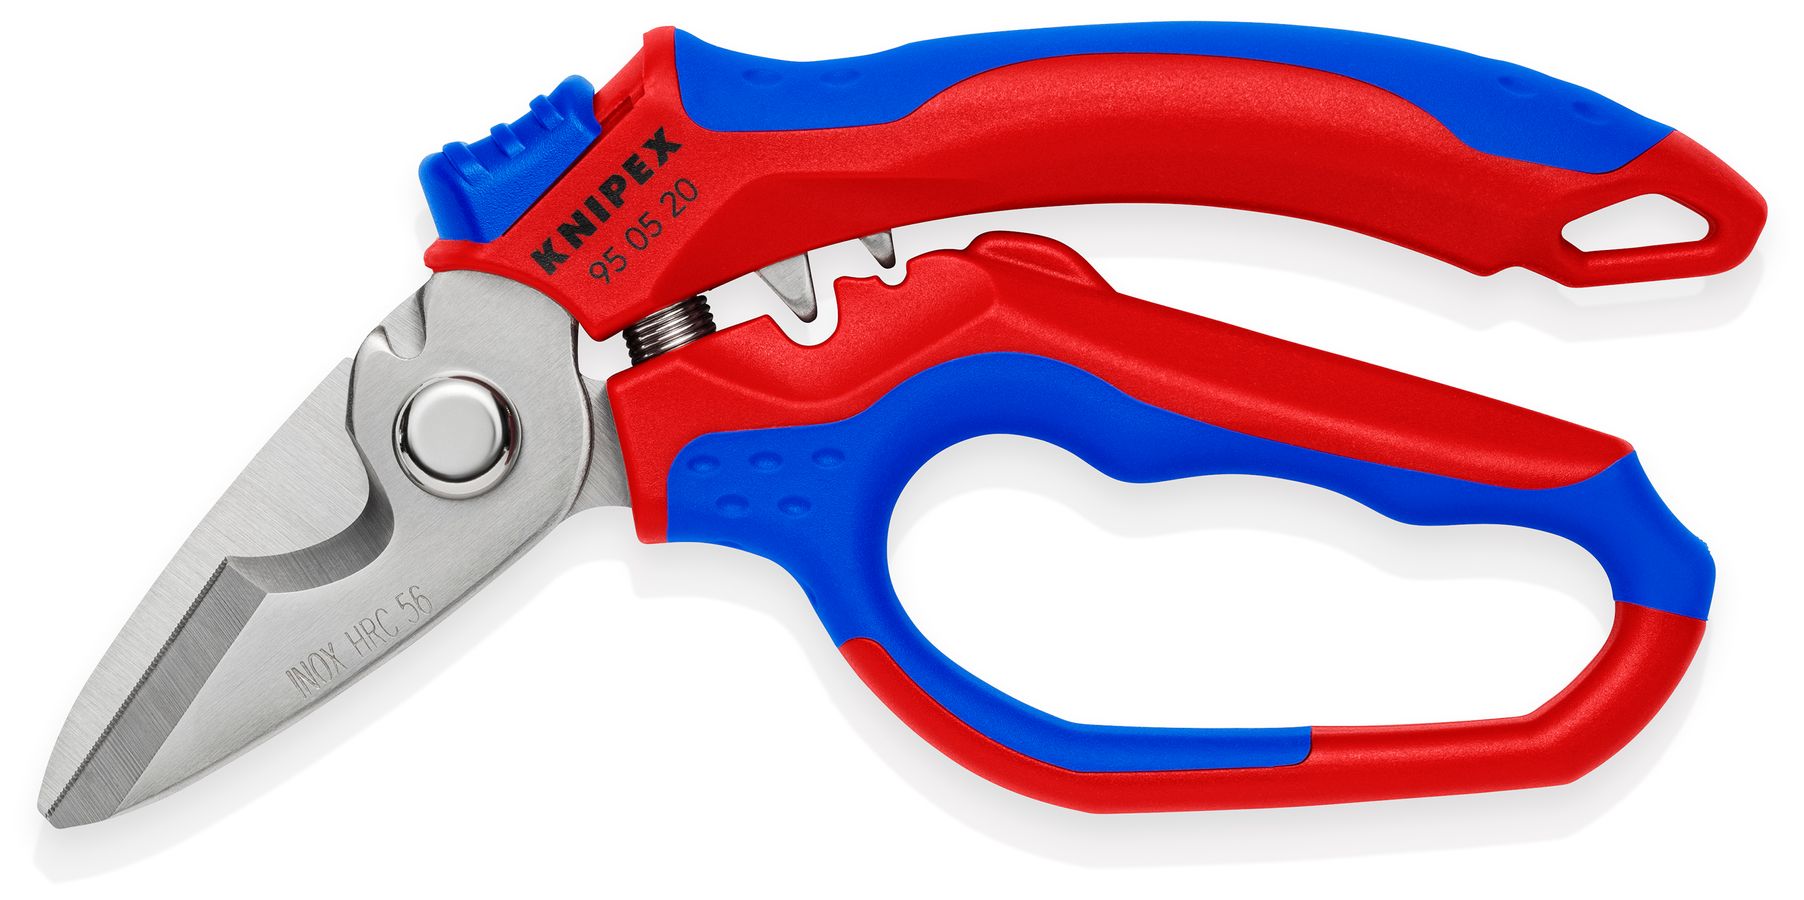 KNIPEX 6-1/4'' Needle Nose Pliers with Angled Comfort Grip